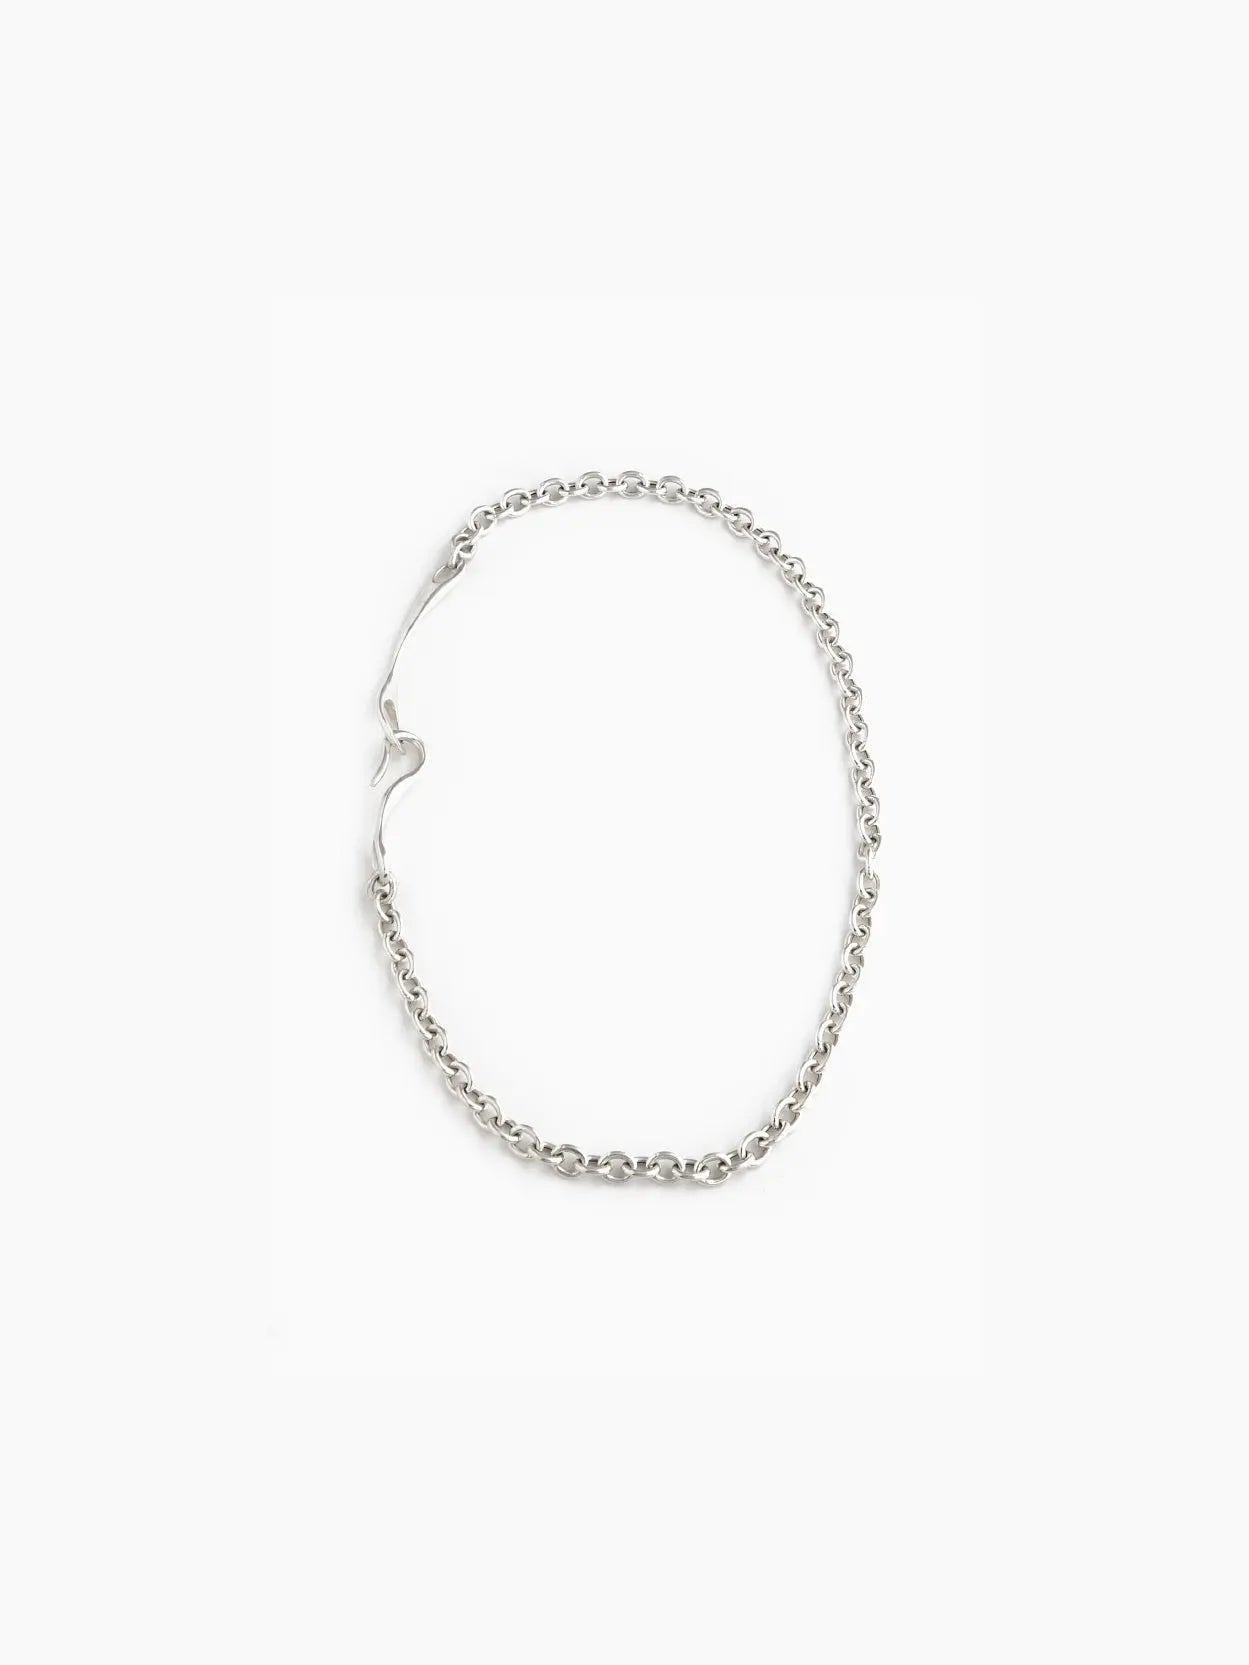 A Maia Necklace from Nathalie Schreckenberg, featuring a linked chain design with a small heart-shaped clasp, laid out in an oval shape on a white background.